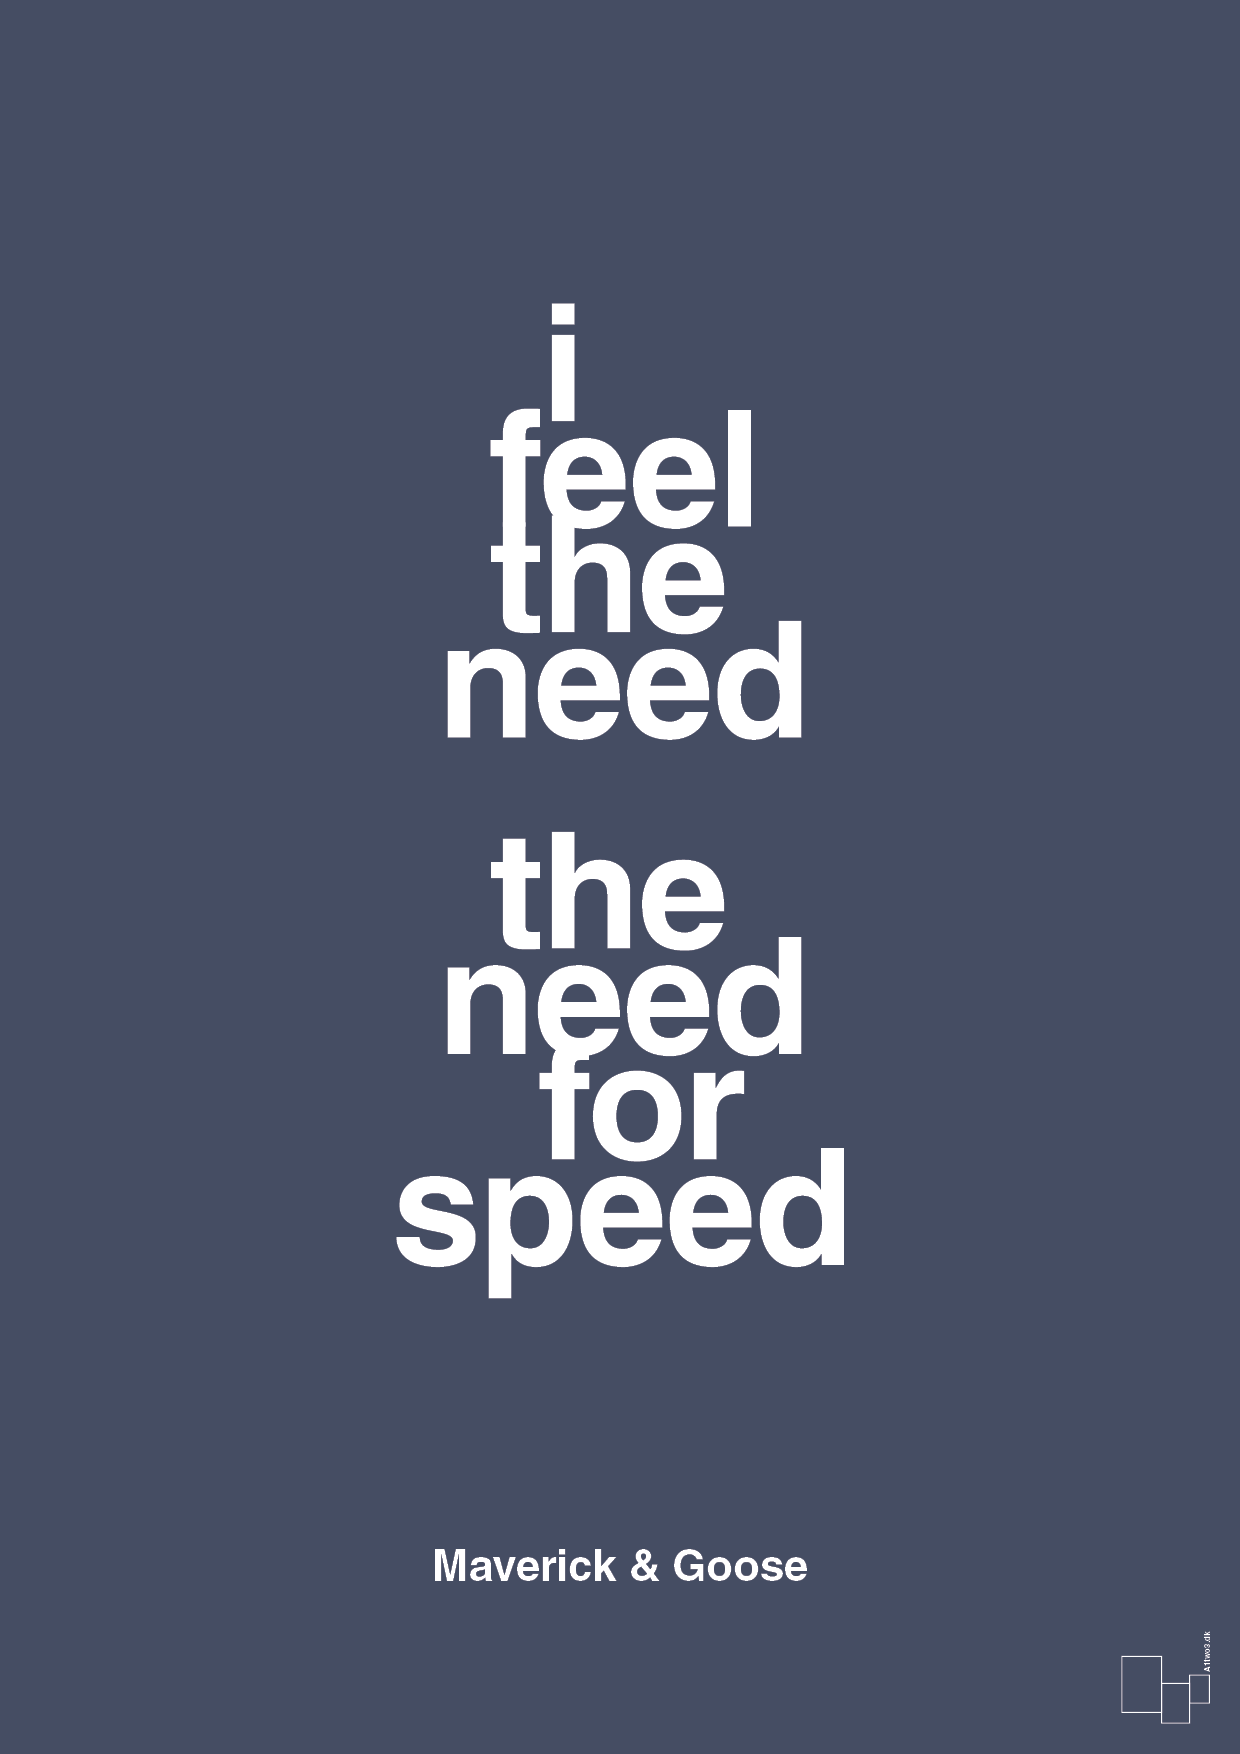 i feel the need the need for speed - Plakat med Citater i Petrol